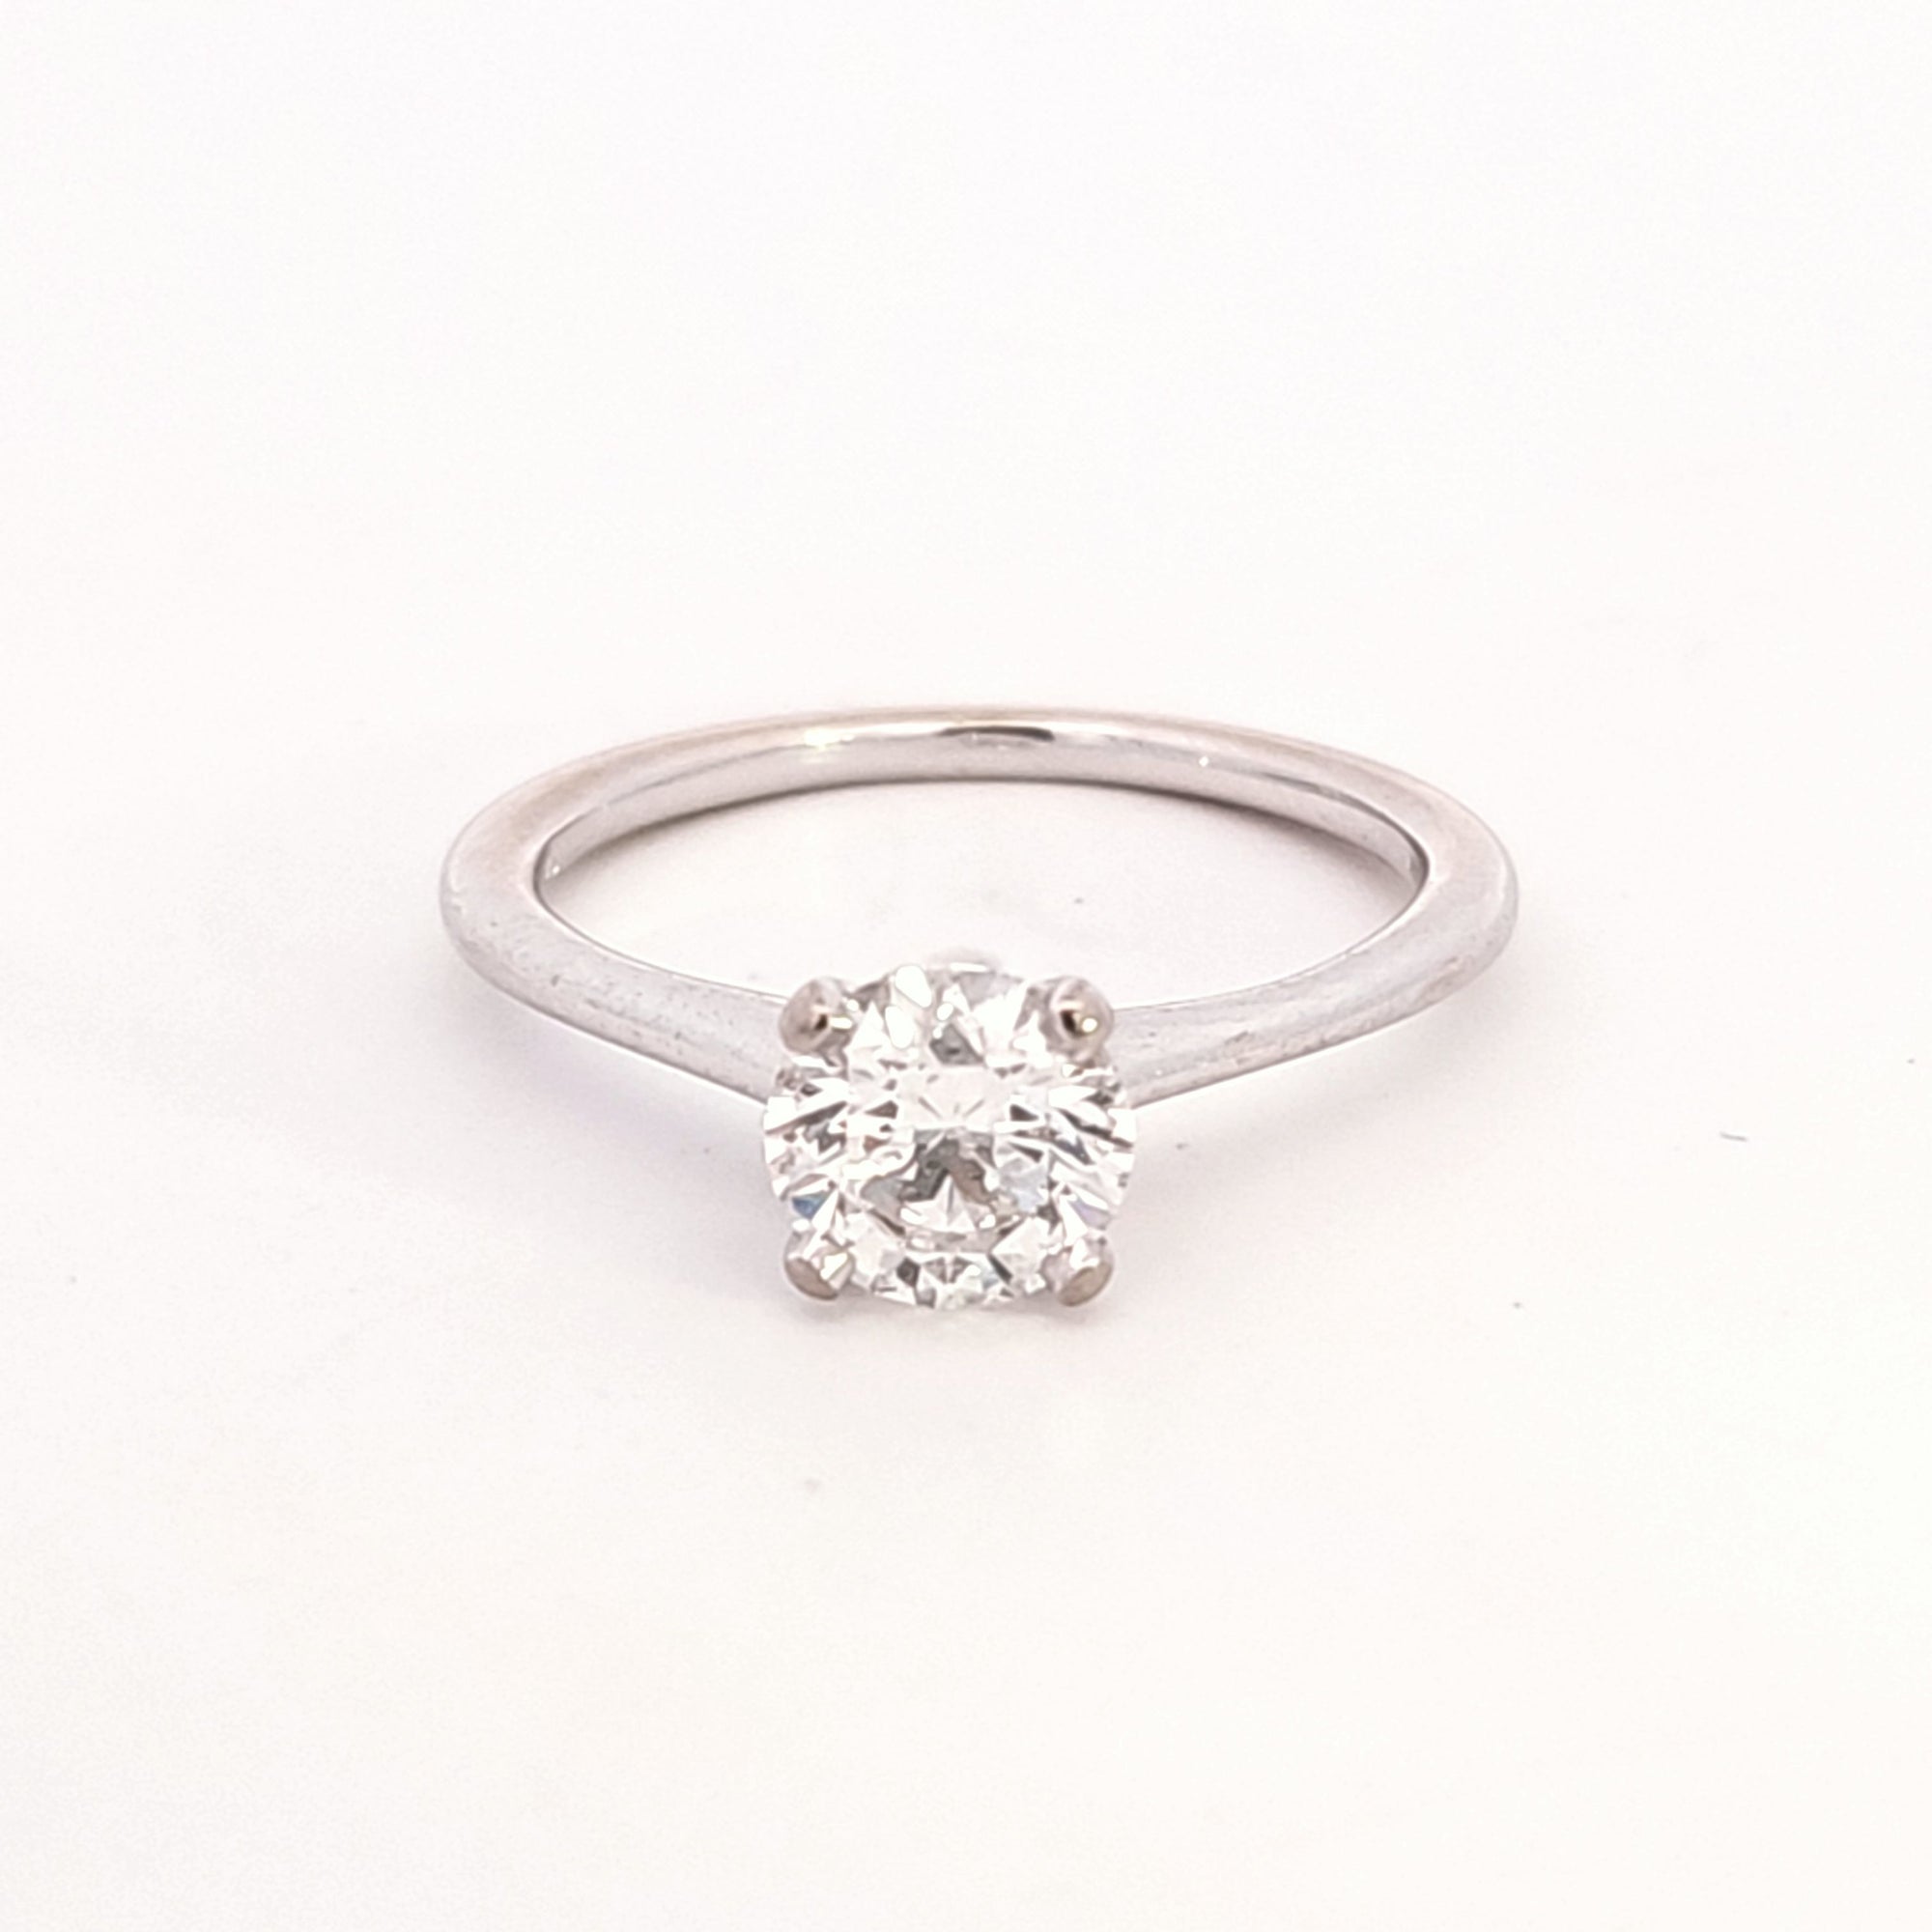 Low Profile Solitaire GIA Diamond Engagement Ring | 1.02 ct | SZ 7 |